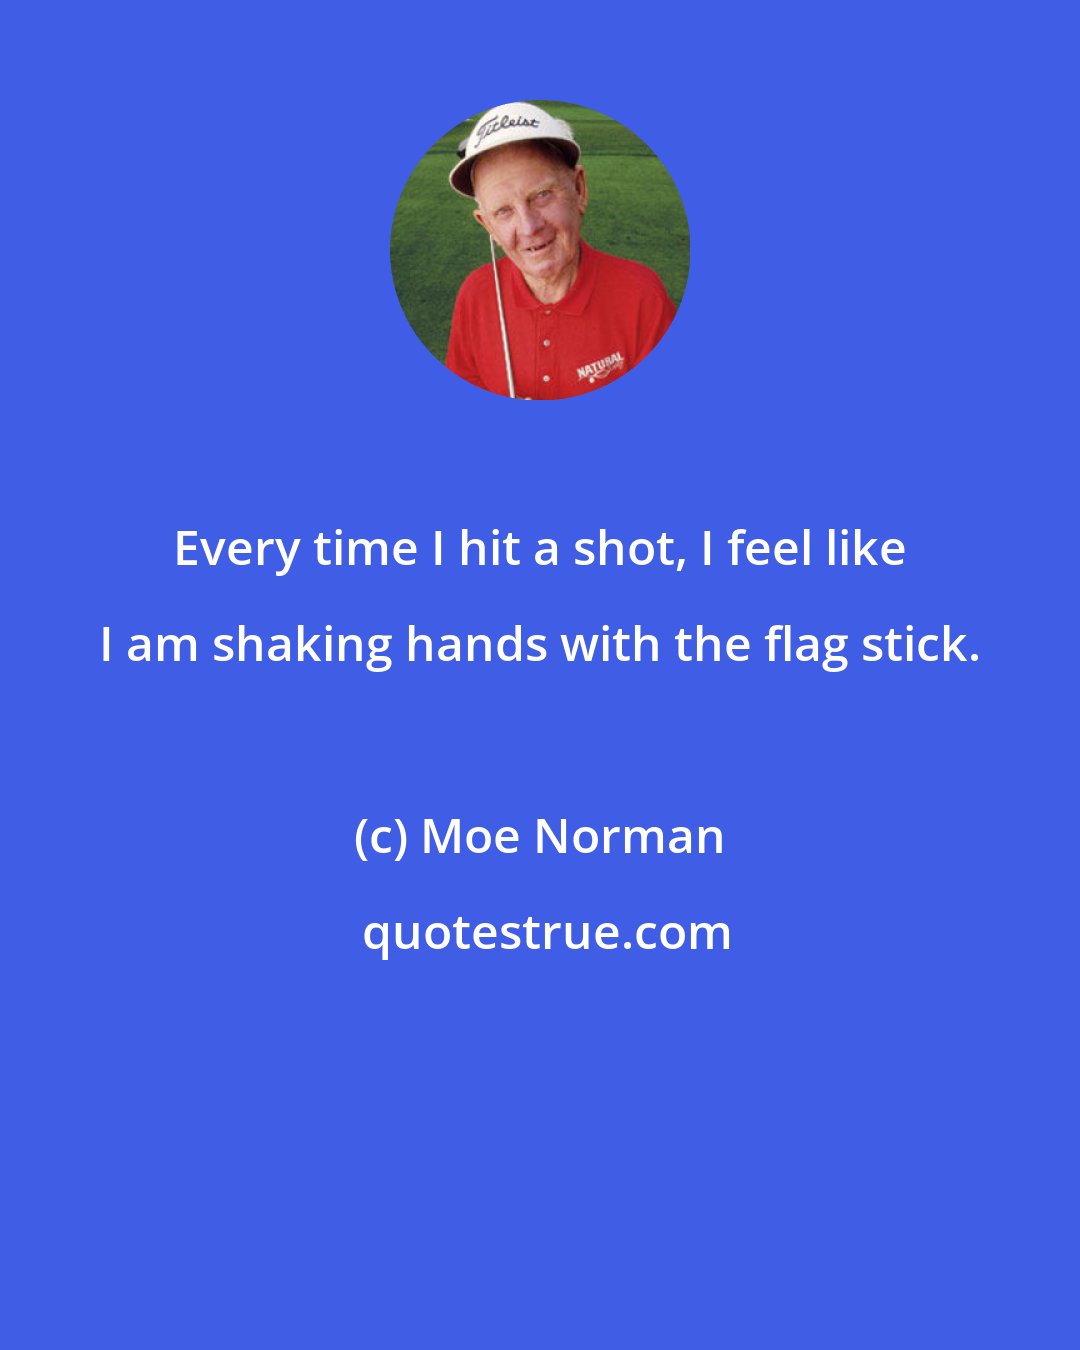 Moe Norman: Every time I hit a shot, I feel like I am shaking hands with the flag stick.